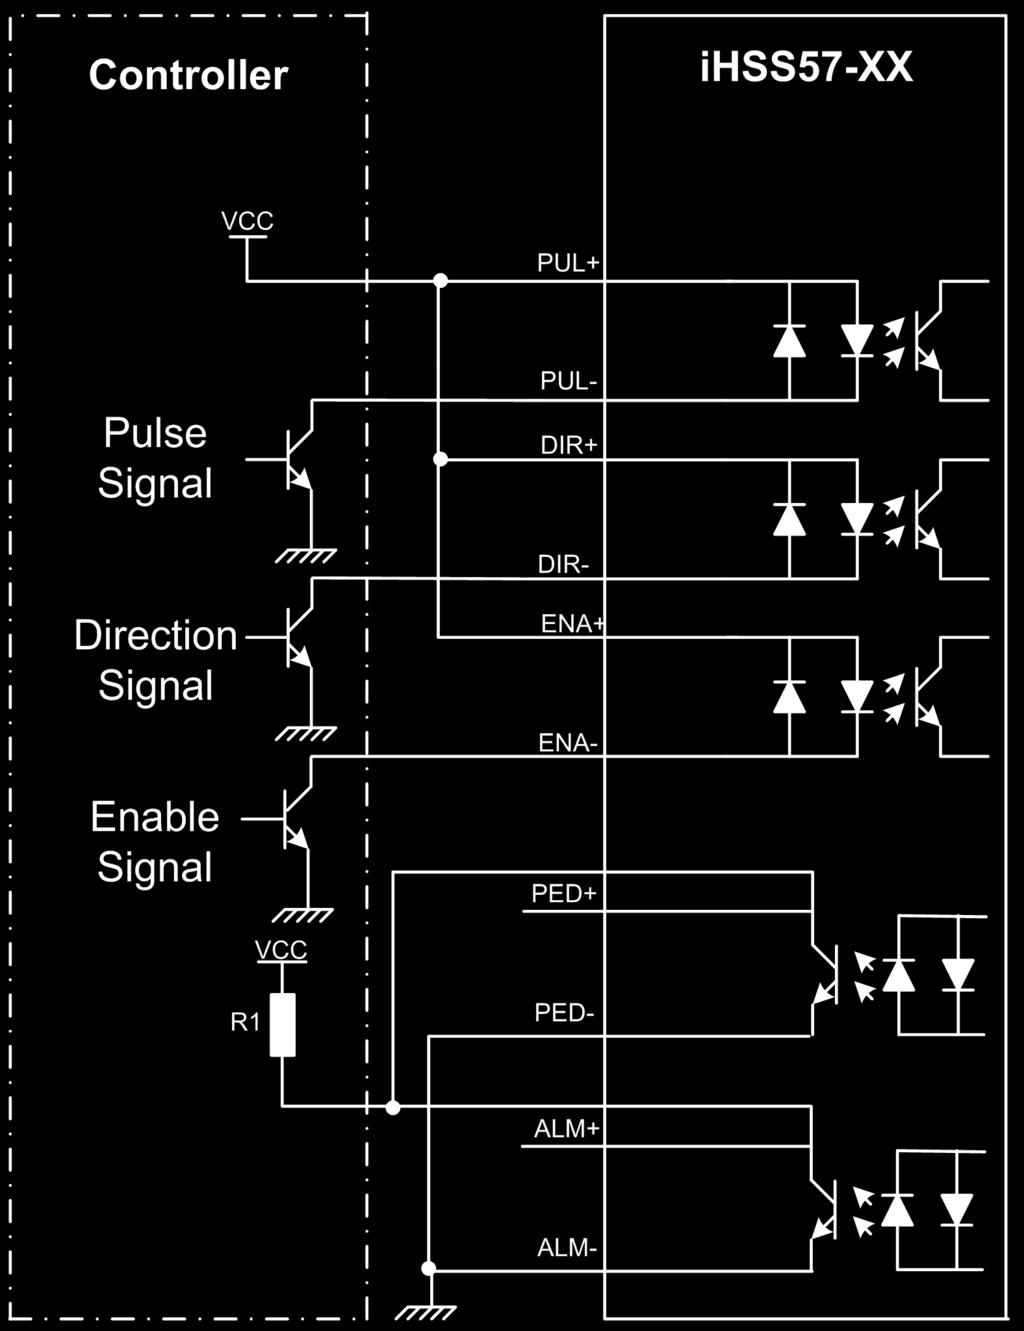 5. Connections to Control Signal 5.